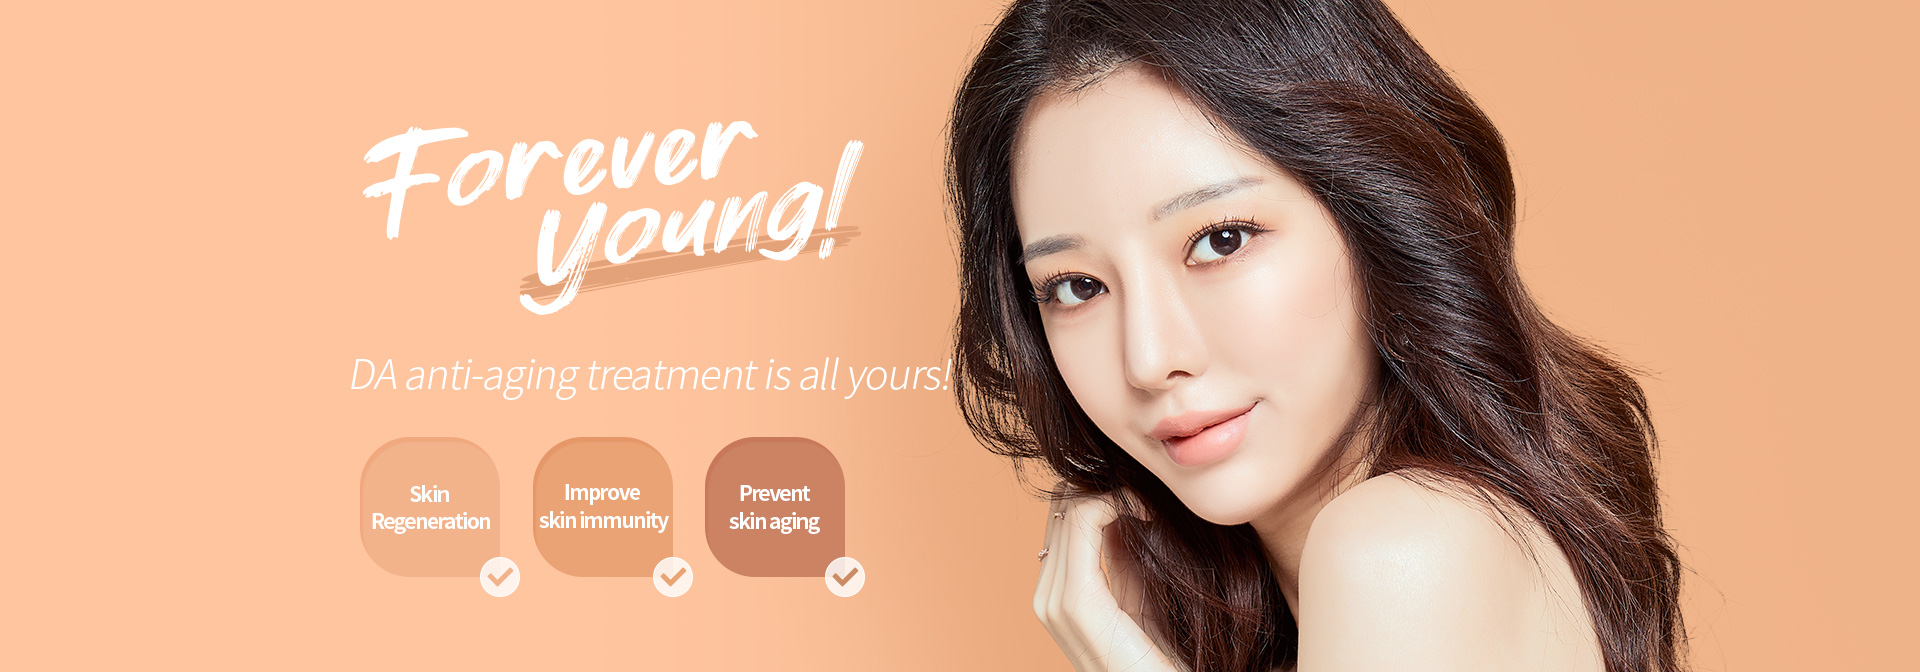 DA anti-aging treatment is all yours!